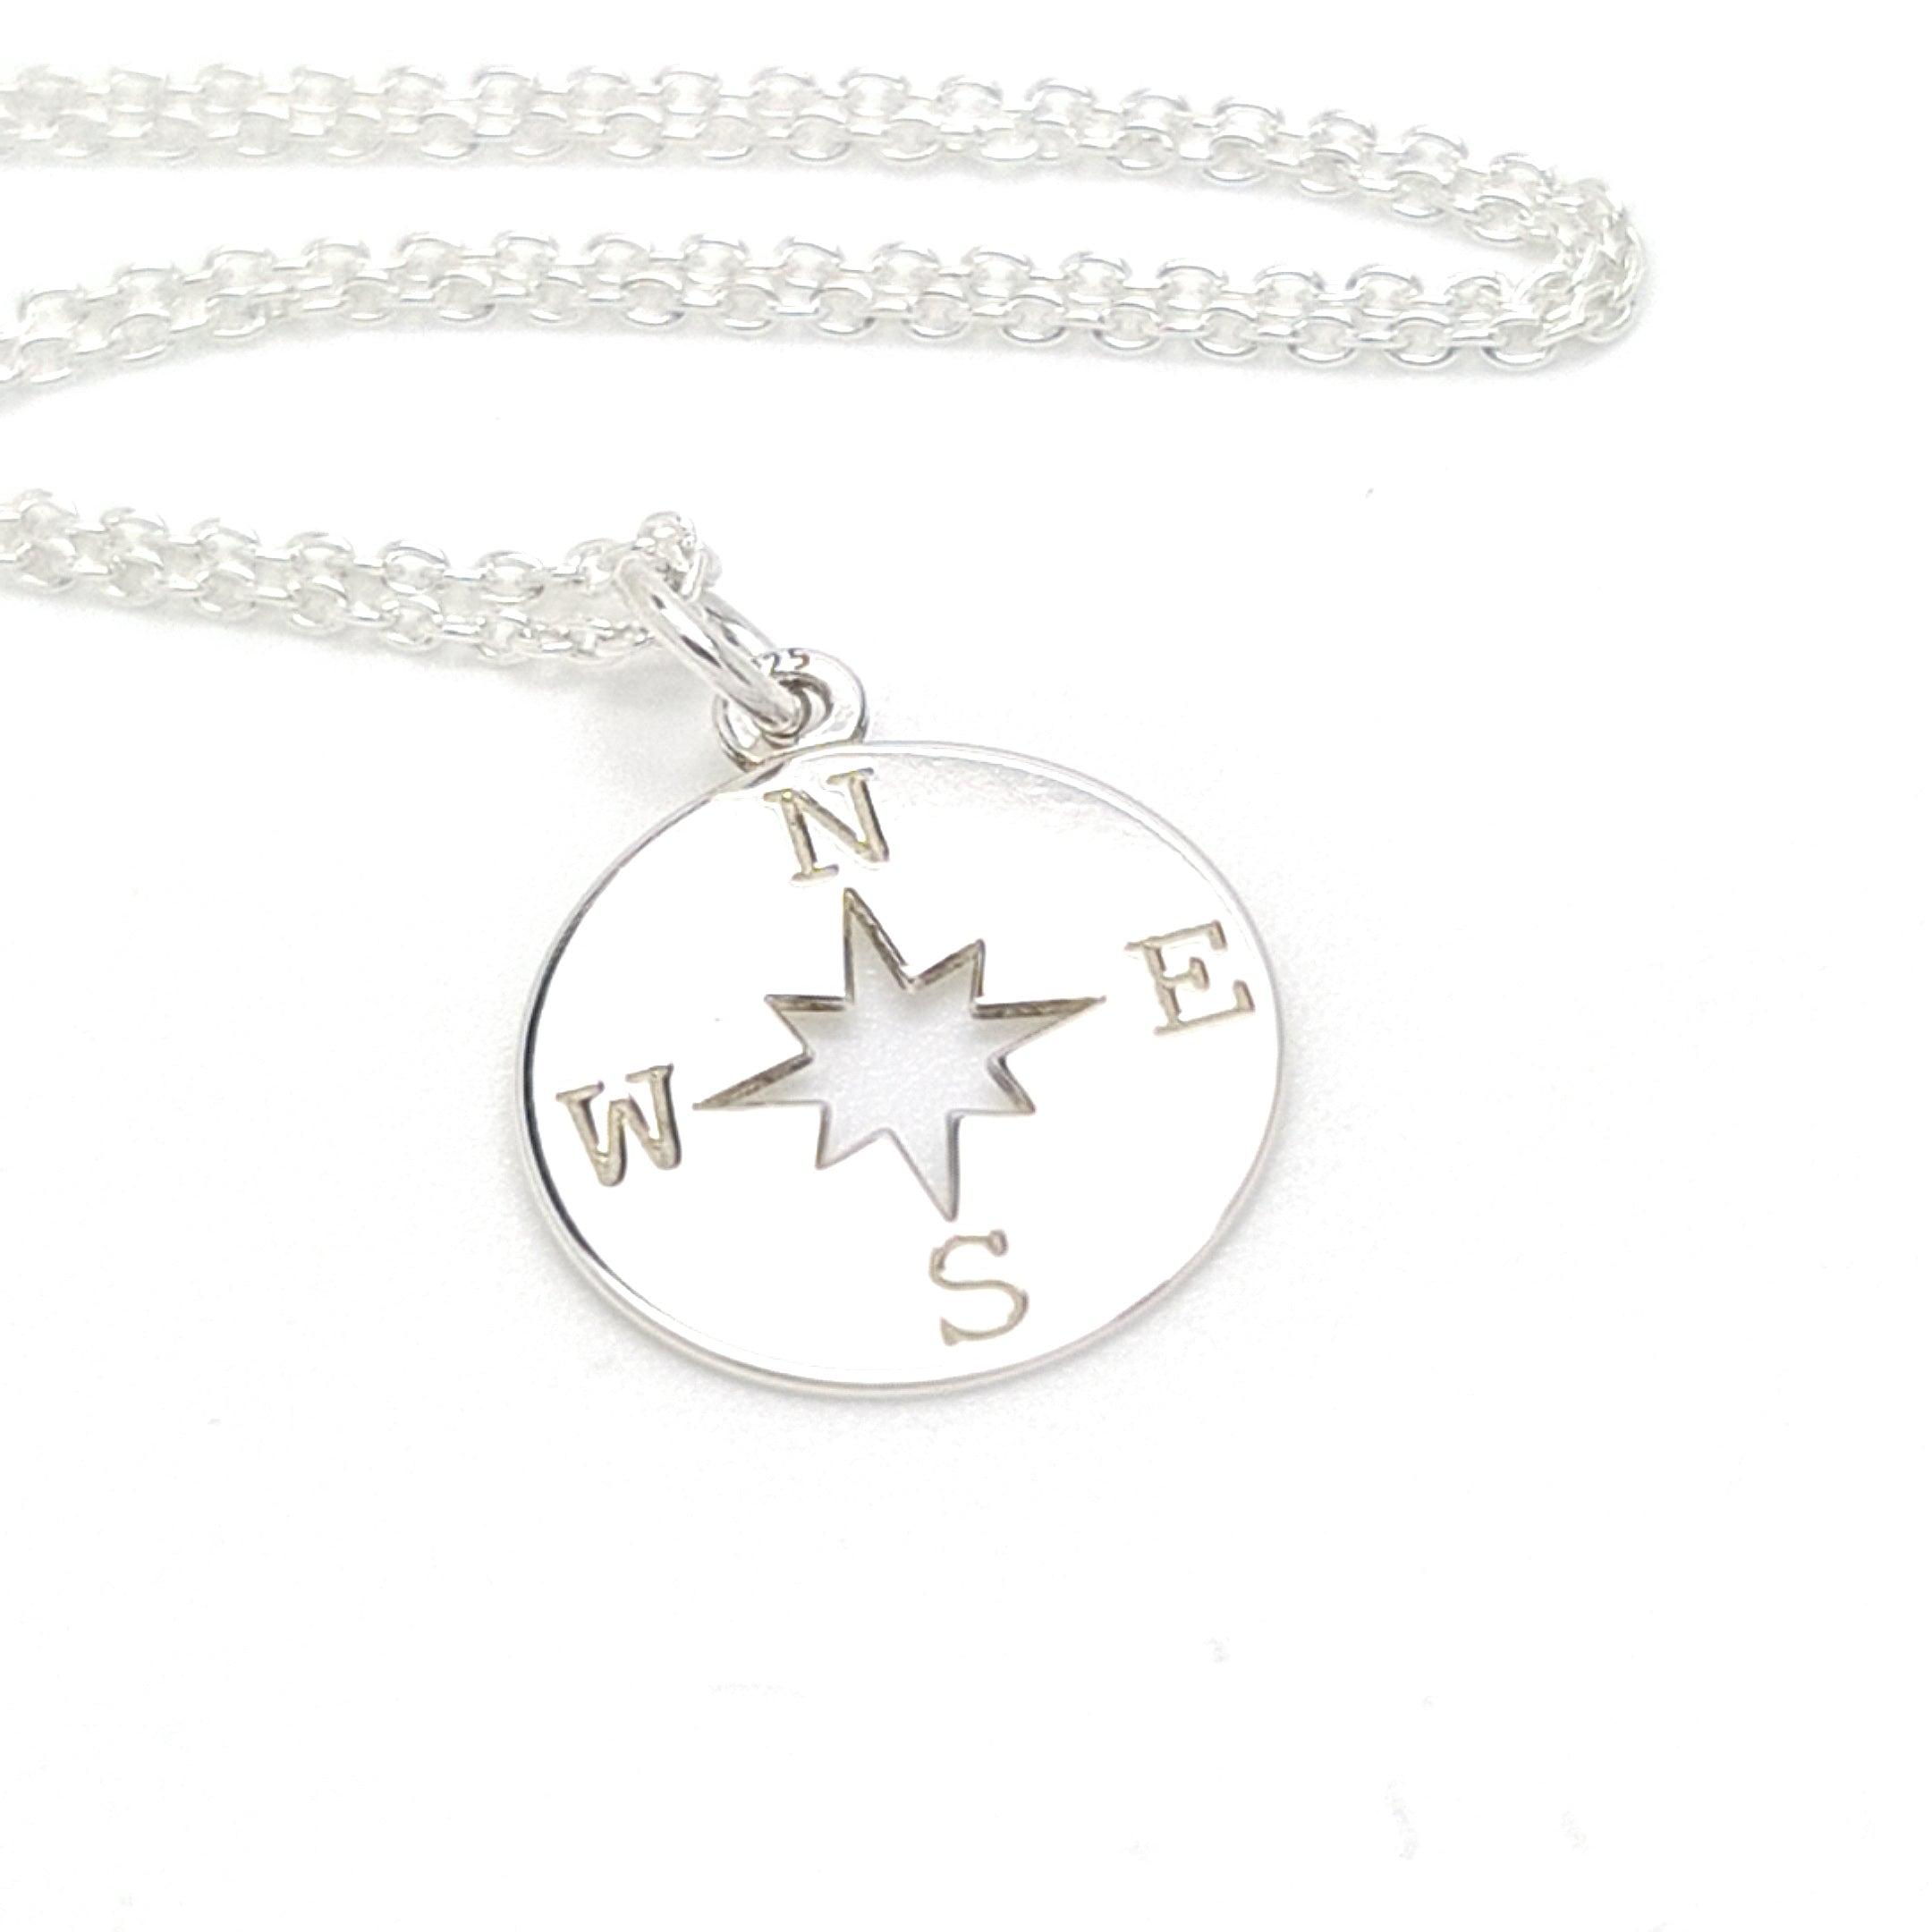 Sterling silver compass necklace with adjustable chain by Magpie Gems, illustrating guidance and personal exploration.